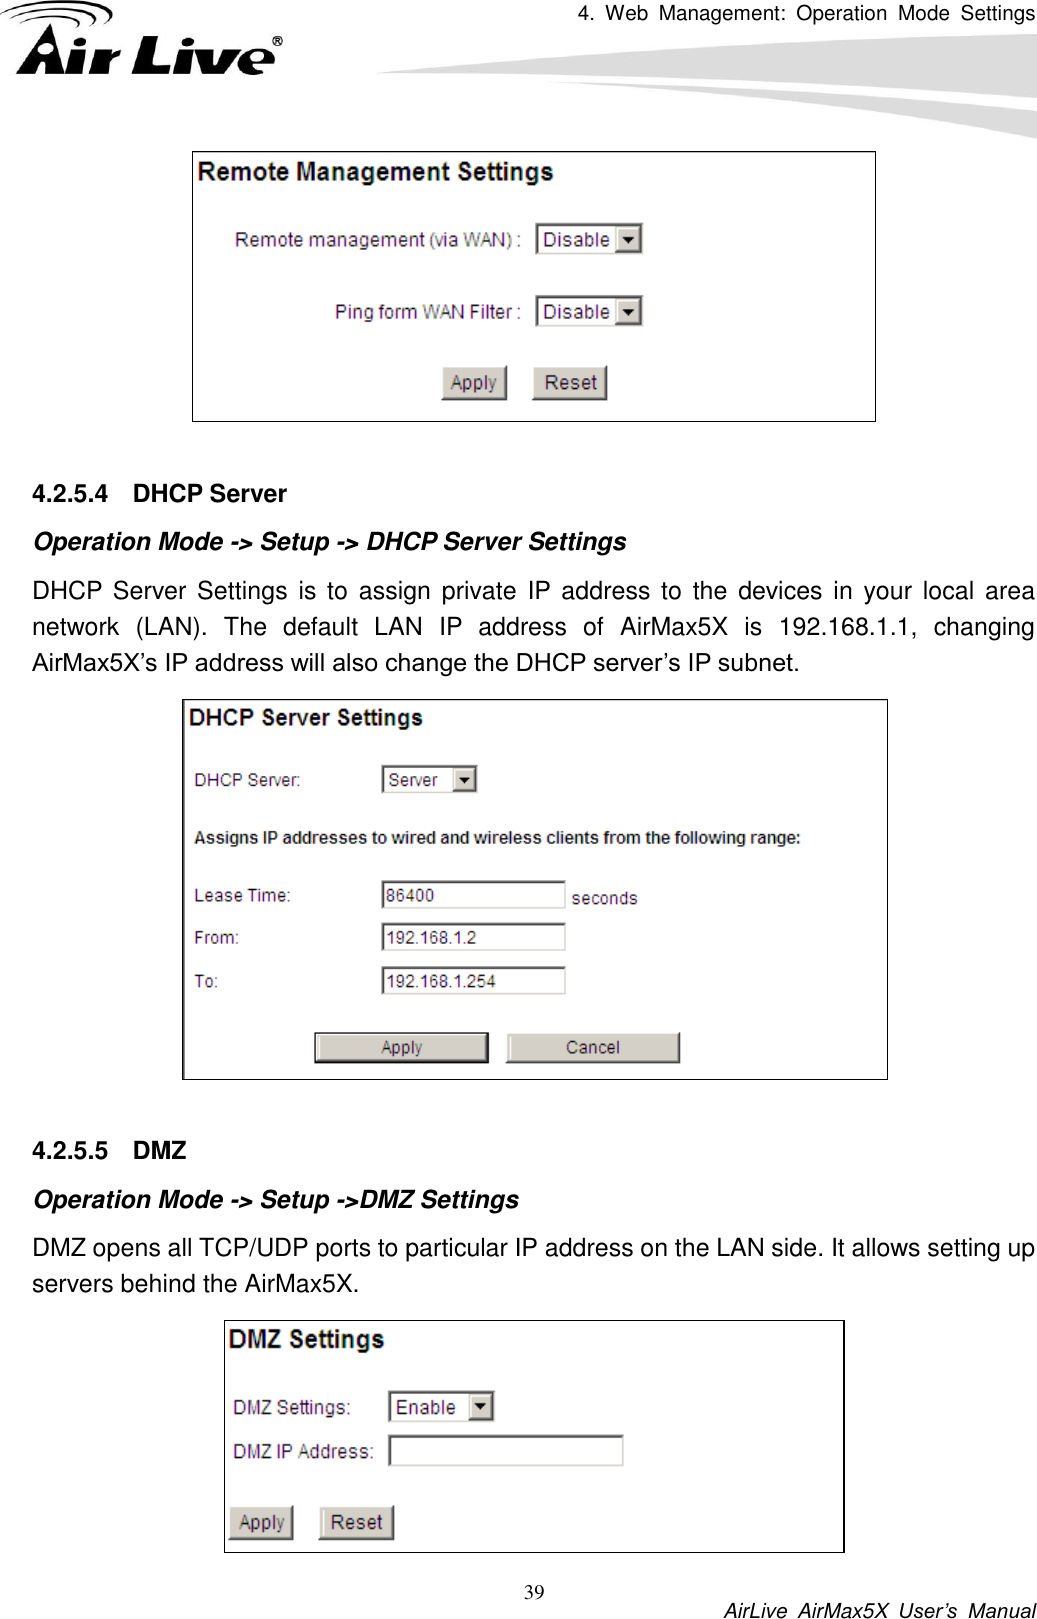 4.  Web  Management:  Operation  Mode  Settings           AirLive  AirMax5X  User’s  Manual 39   4.2.5.4  DHCP Server Operation Mode -&gt; Setup -&gt; DHCP Server Settings DHCP Server Settings is to  assign private IP  address to  the devices in your  local area network  (LAN).  The  default  LAN  IP  address  of  AirMax5X  is  192.168.1.1,  changing AirMax5X’s IP address will also change the DHCP server’s IP subnet.     4.2.5.5  DMZ Operation Mode -&gt; Setup -&gt;DMZ Settings DMZ opens all TCP/UDP ports to particular IP address on the LAN side. It allows setting up servers behind the AirMax5X.  